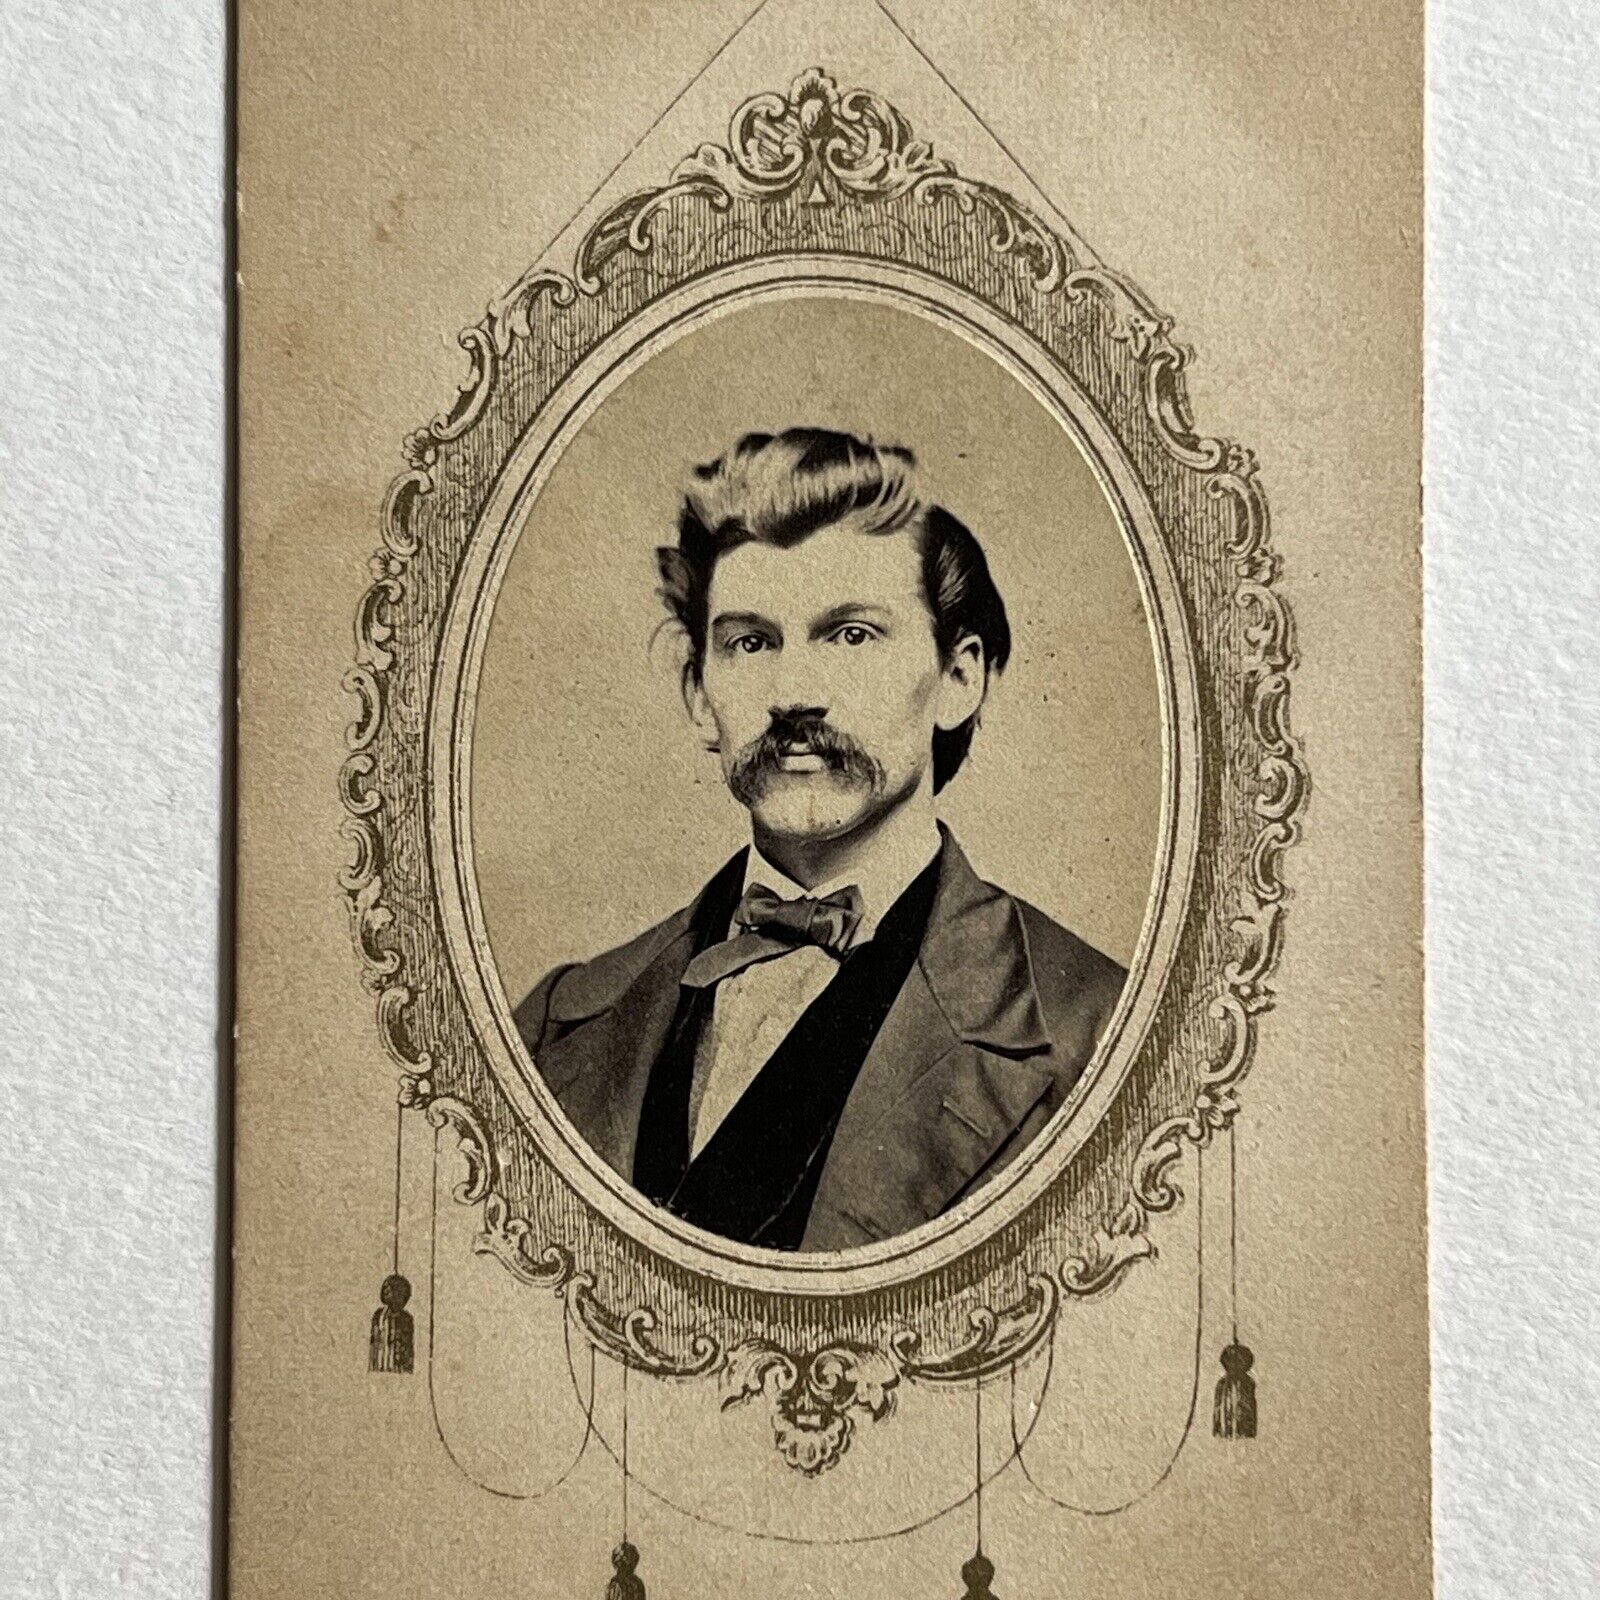 Antique CDV Photograph Charming Handsome Young Man Great Mustache & Hair Border